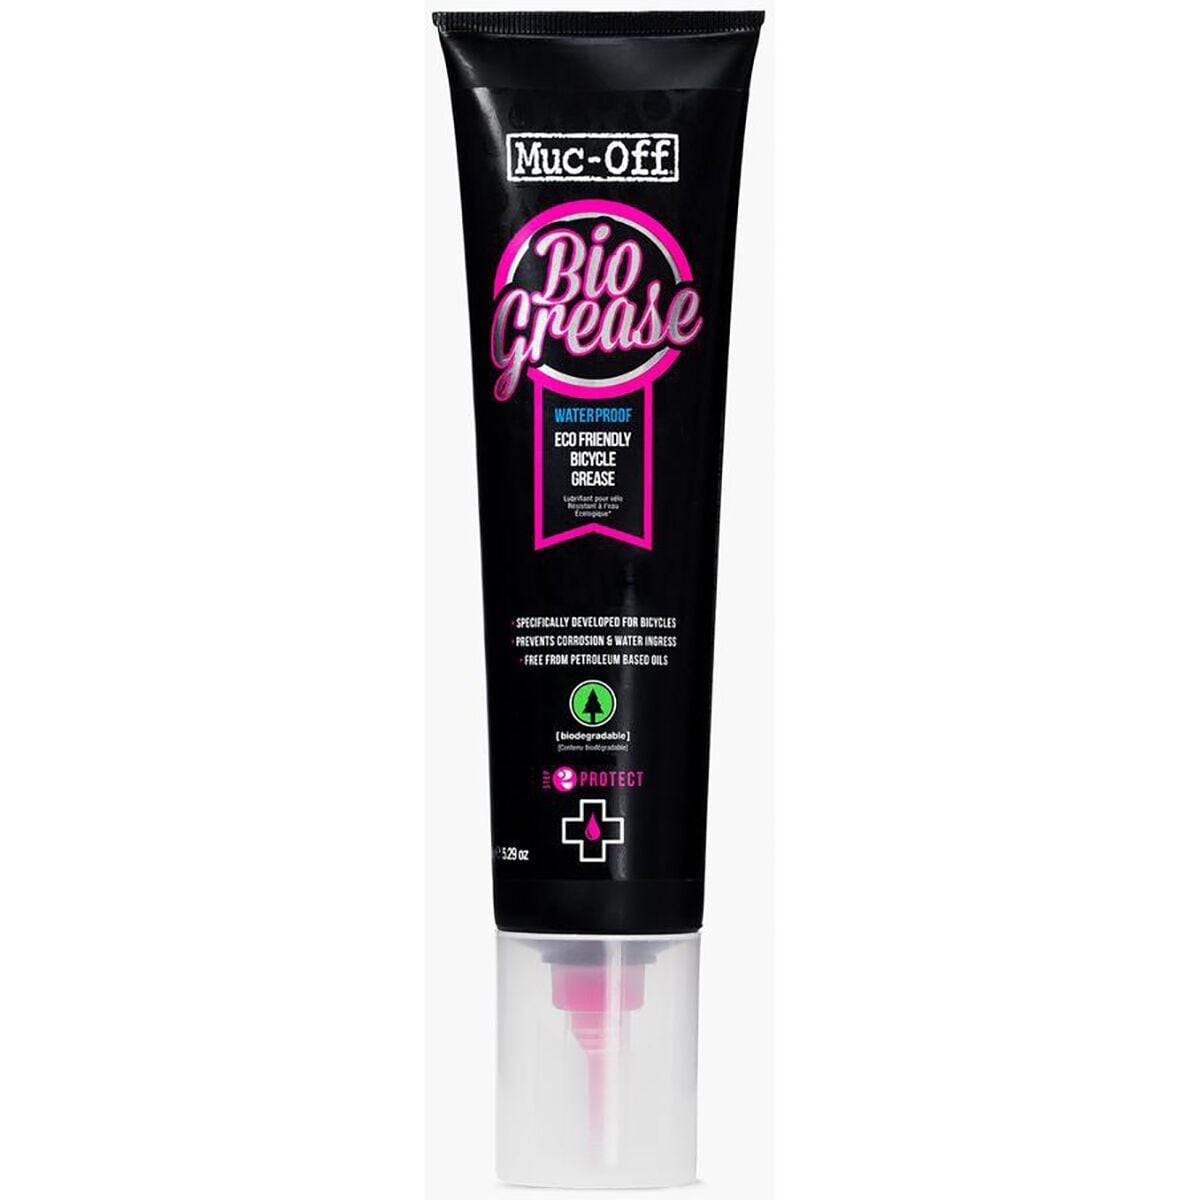 Muc-Off Bio Grease One Color, 150g